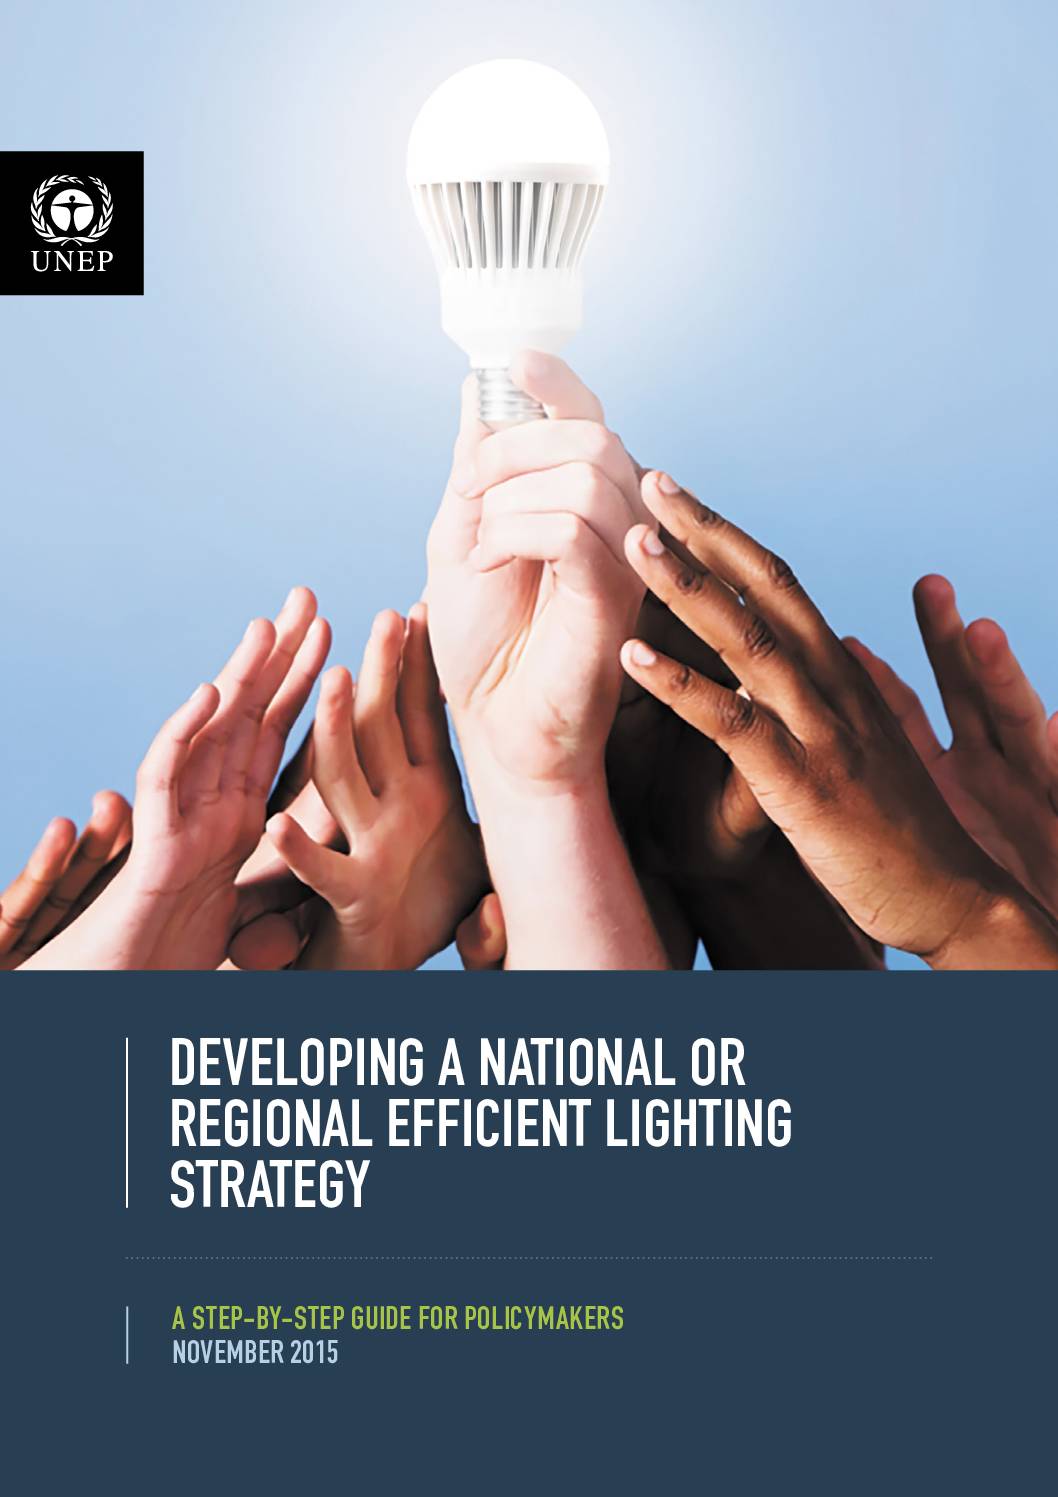 DEVELOPING A NATIONAL OR REGIONAL EFFICIENT LIGHTING STRATEGY